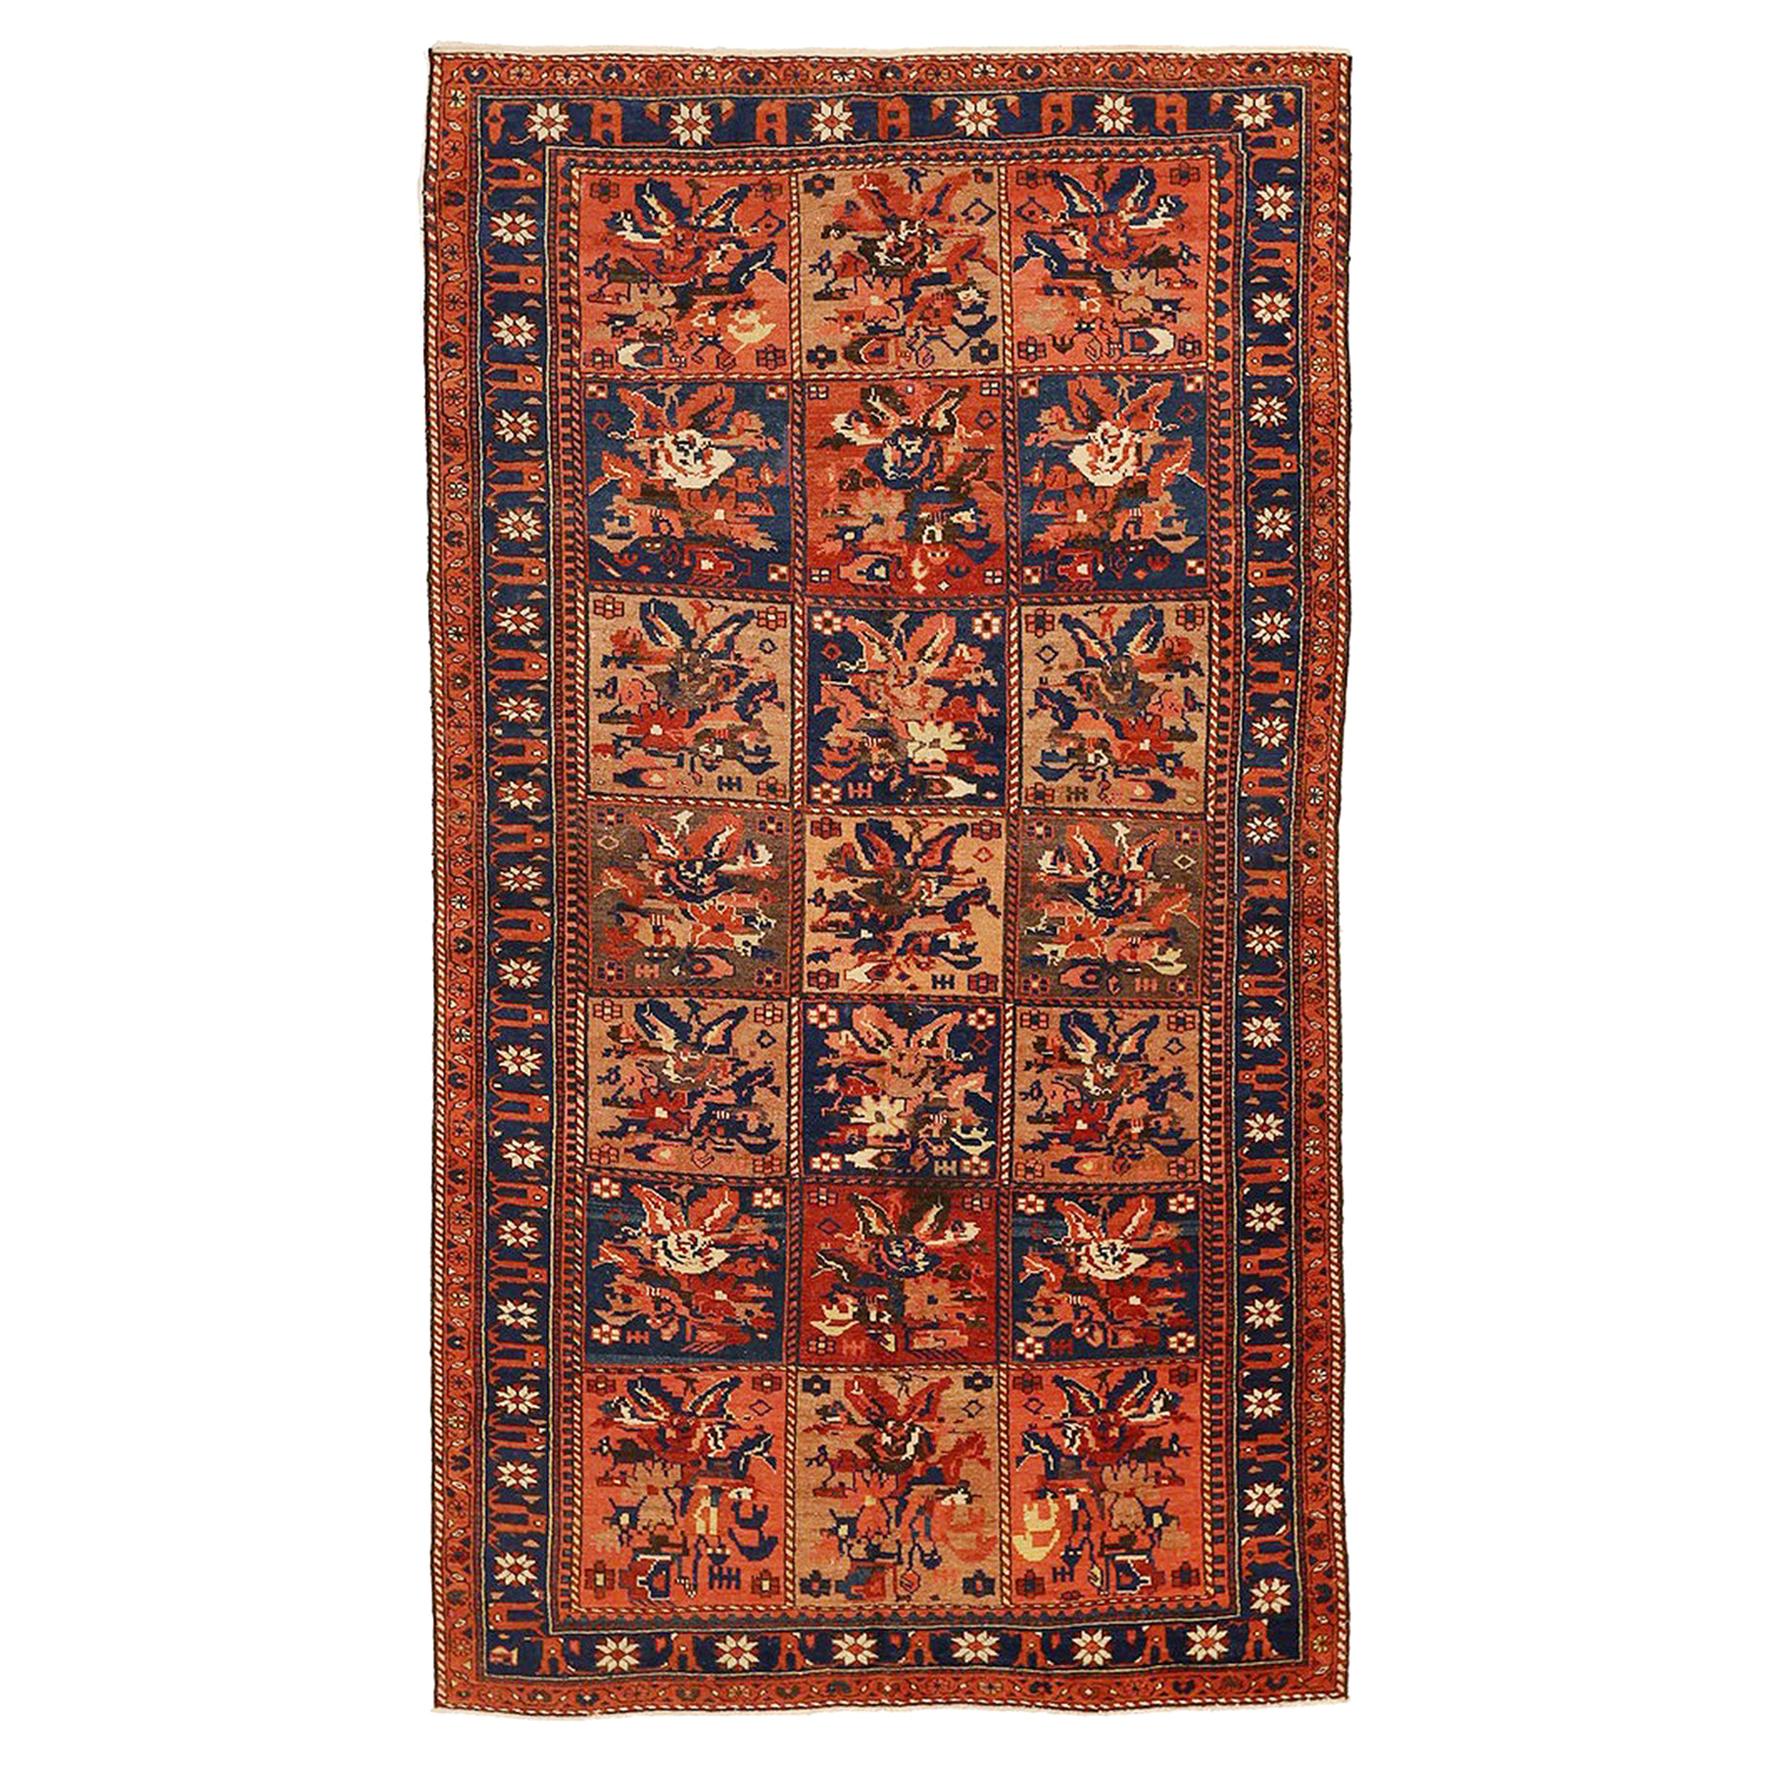 Antique Persian Bakhtiar Rug with Navy and Red Flower Details on Beige Field